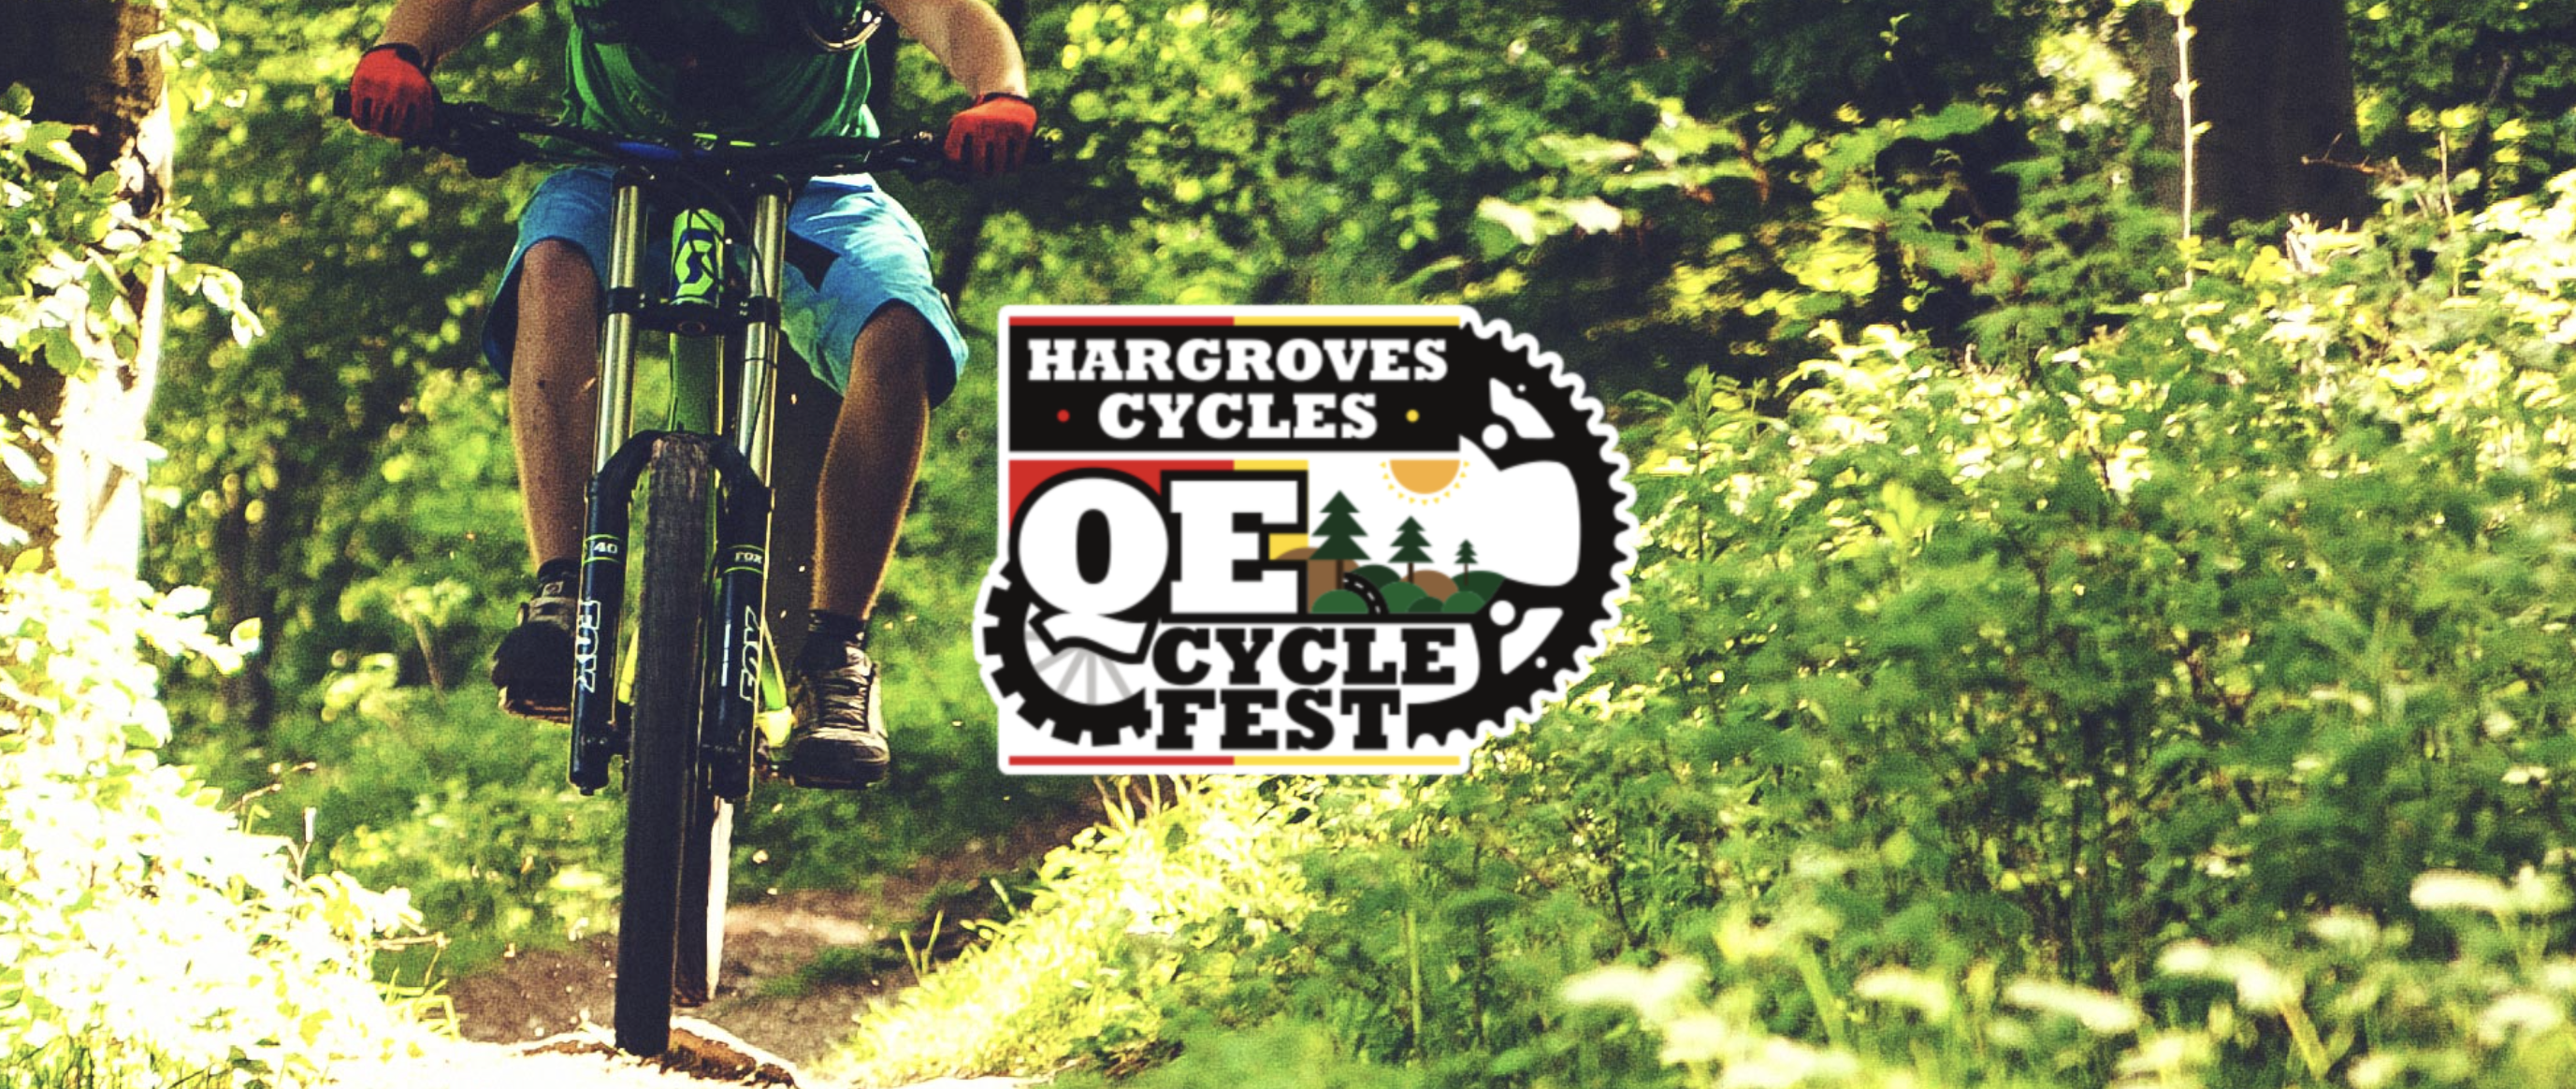 Hargroves QE Cyclefest